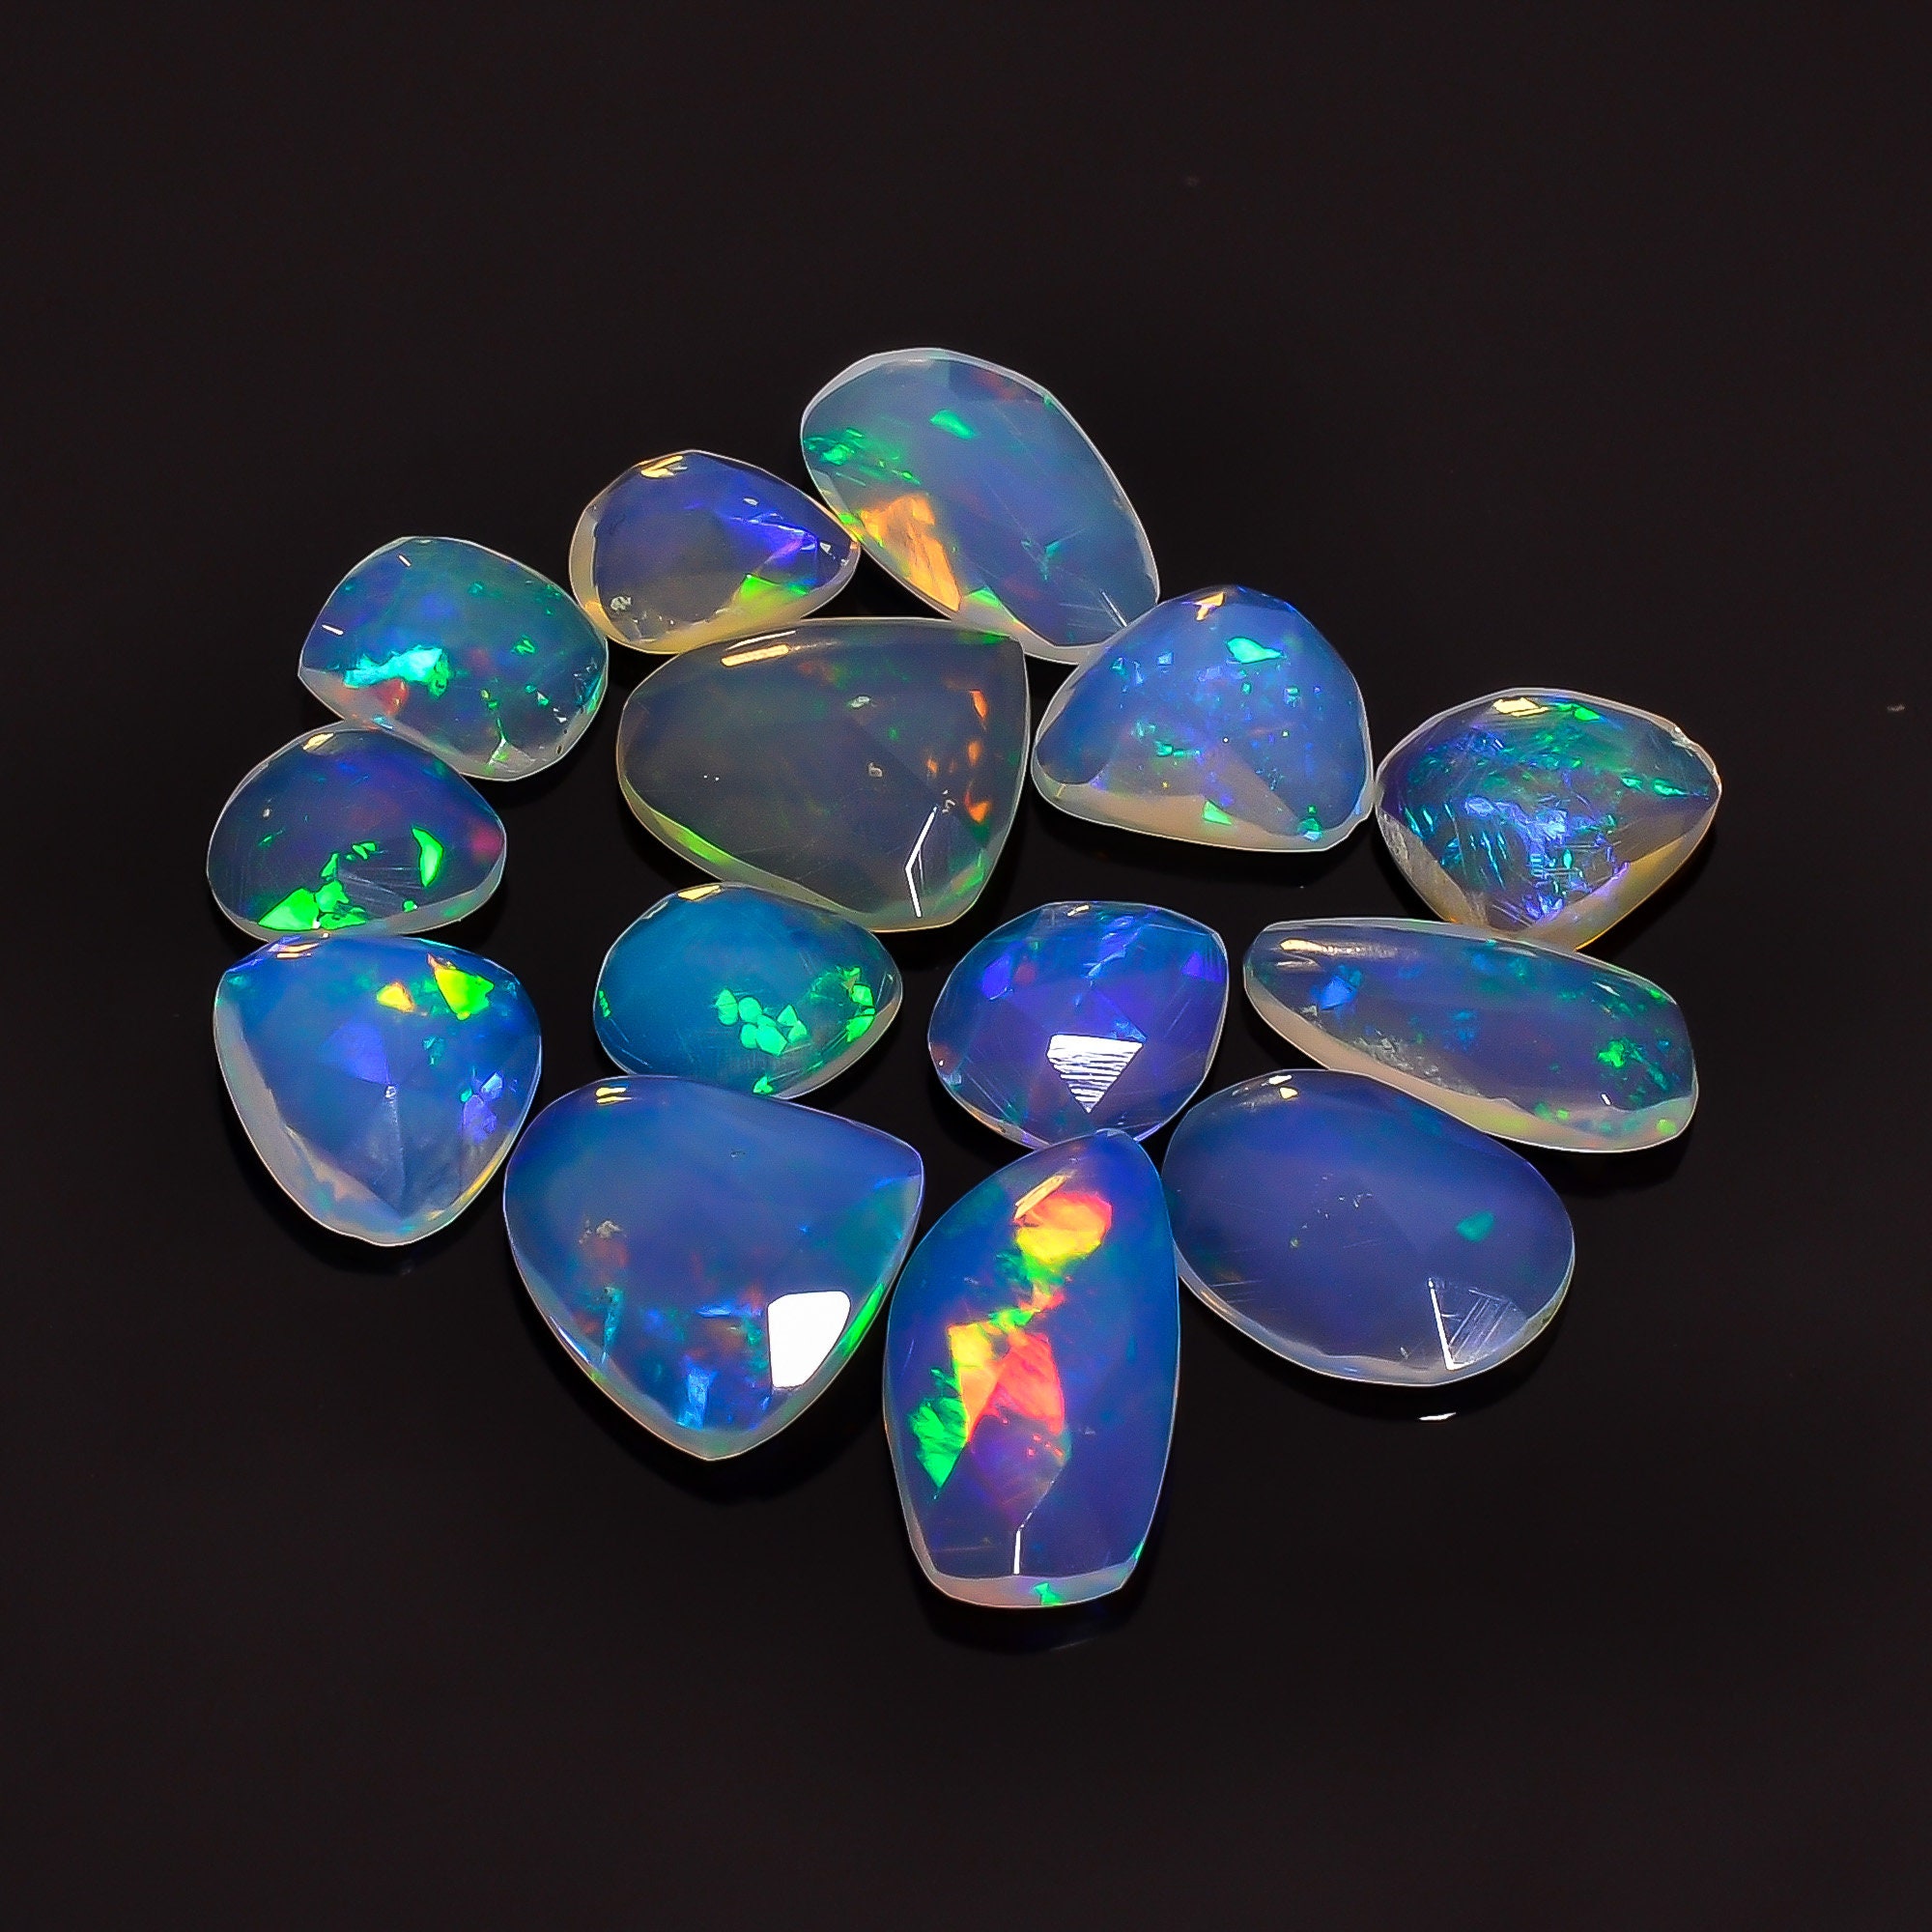 10X6 18X7 mm R-5135 Attractive A One Quality 100% Natural White Ethiopian Opal Fancy Faceted Gemstone 21 Pcs Lot For Making Jewelry 31.8 Ct